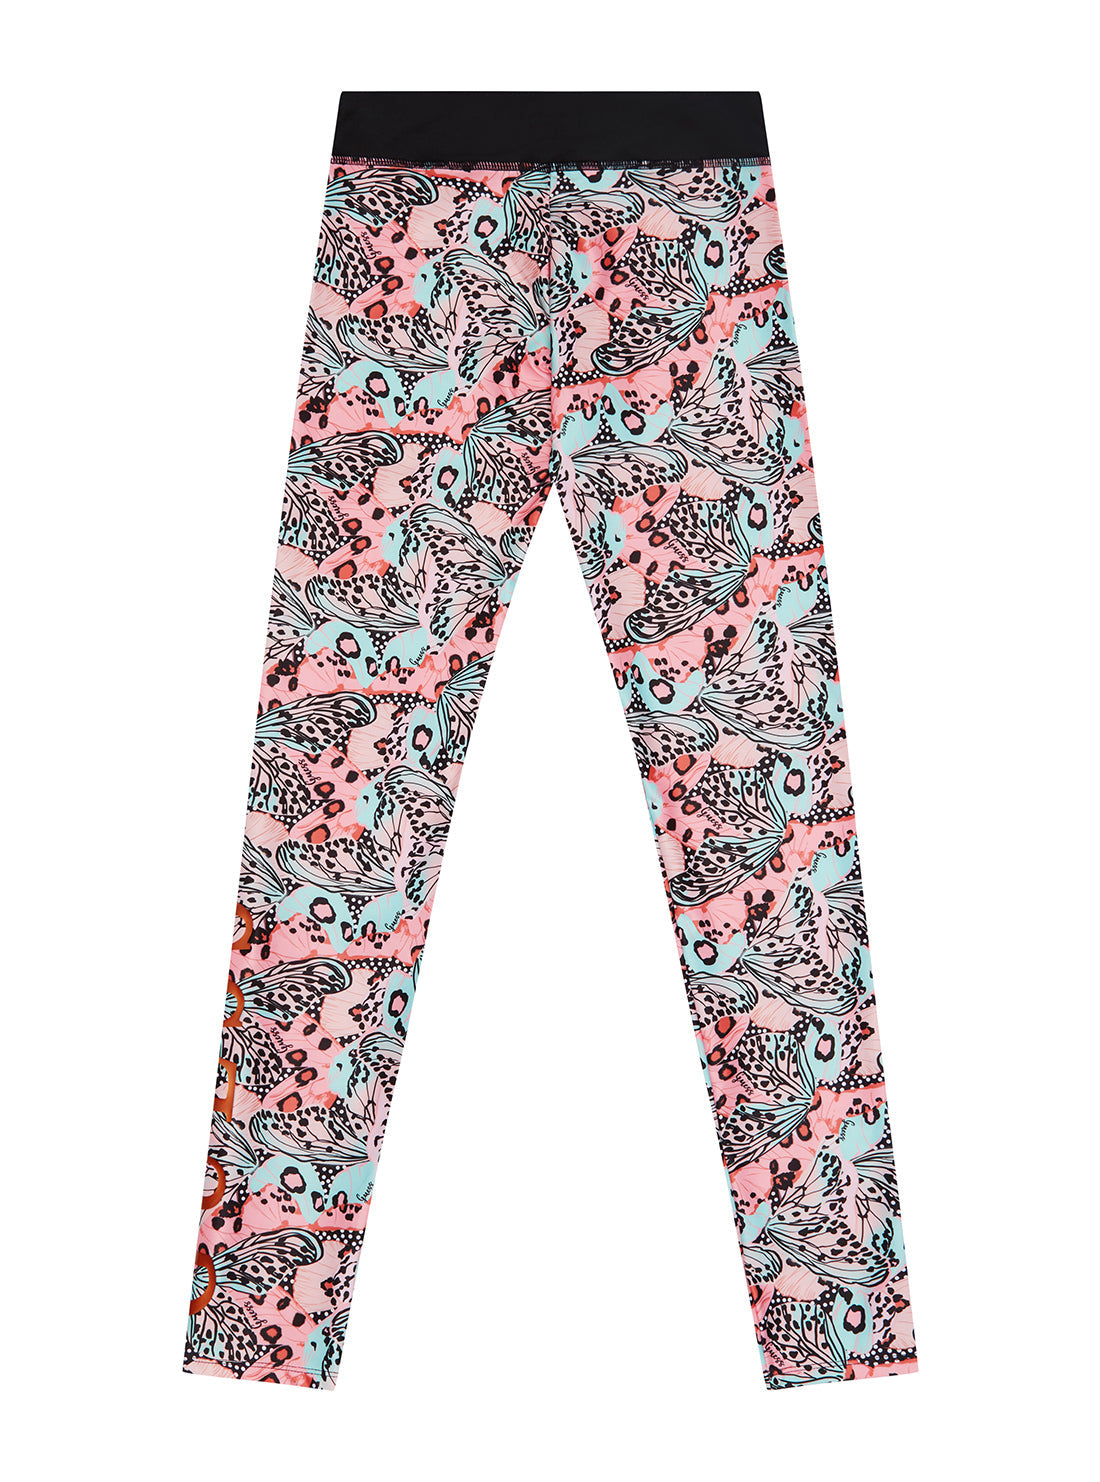 GUESS Kids Girls Pink Butterfly Printed Active Leggings (7-16) J1BB02MC01 Back ViewView